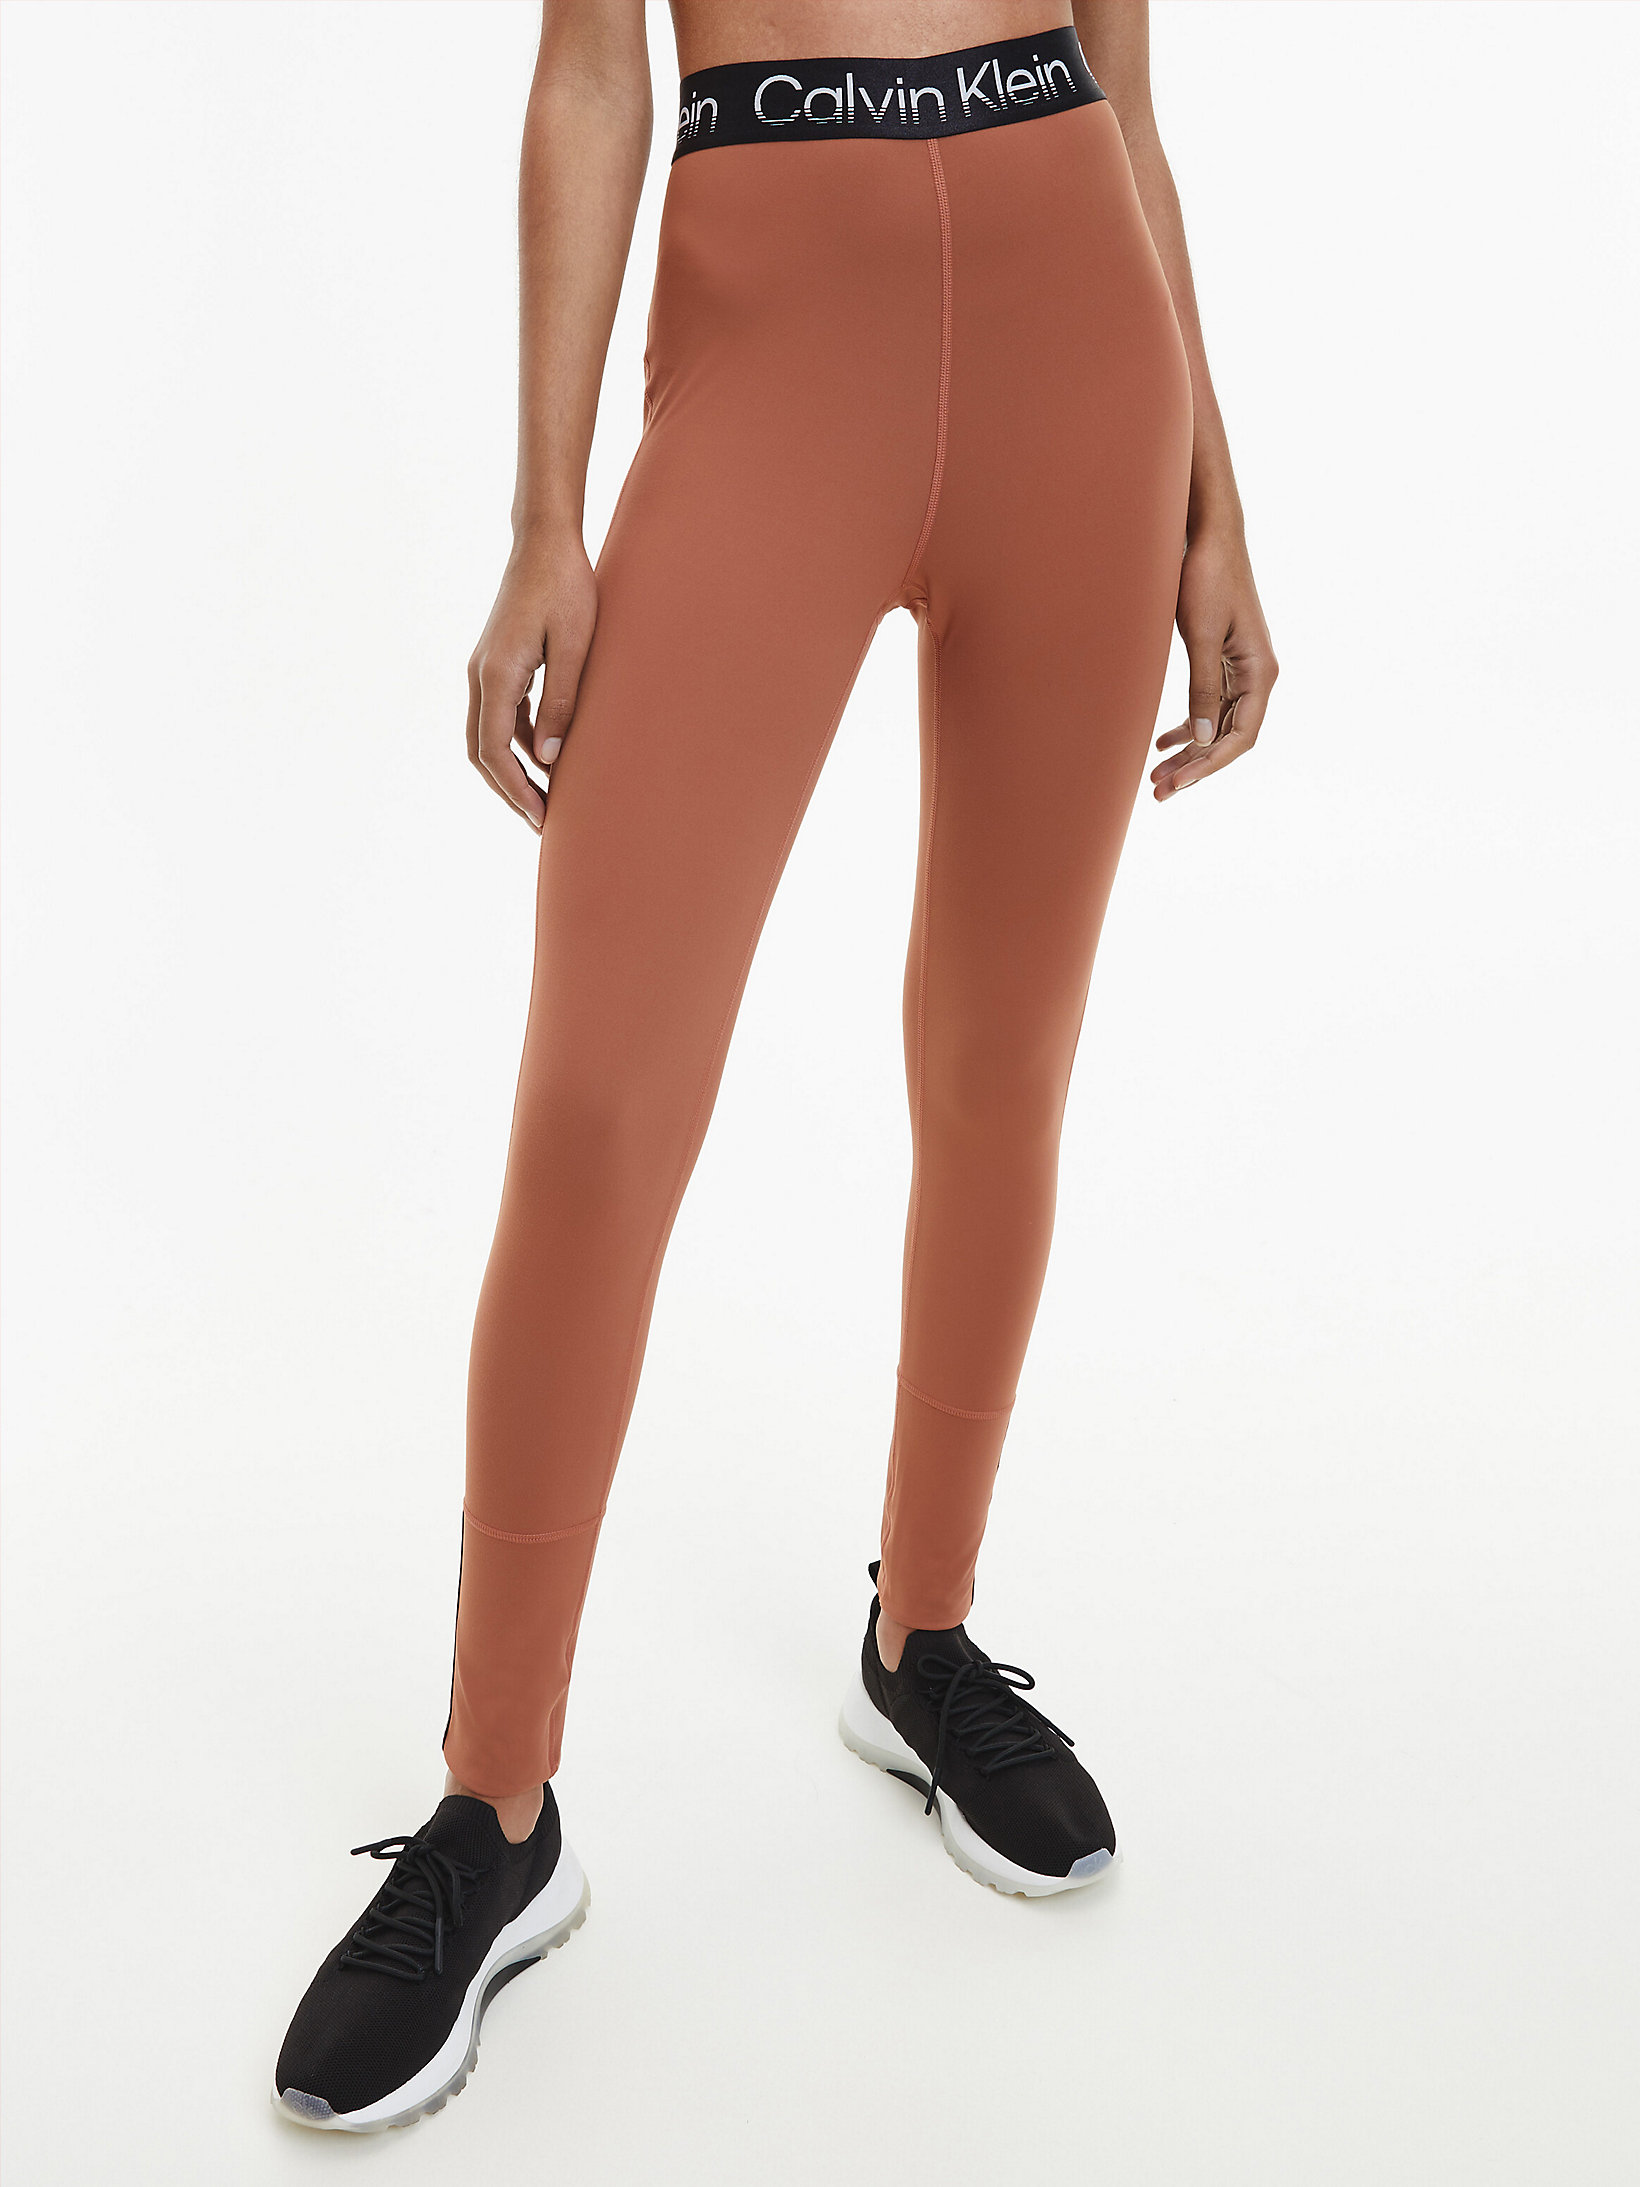 Russet Recycled 7/8 Gym Leggings undefined women Calvin Klein